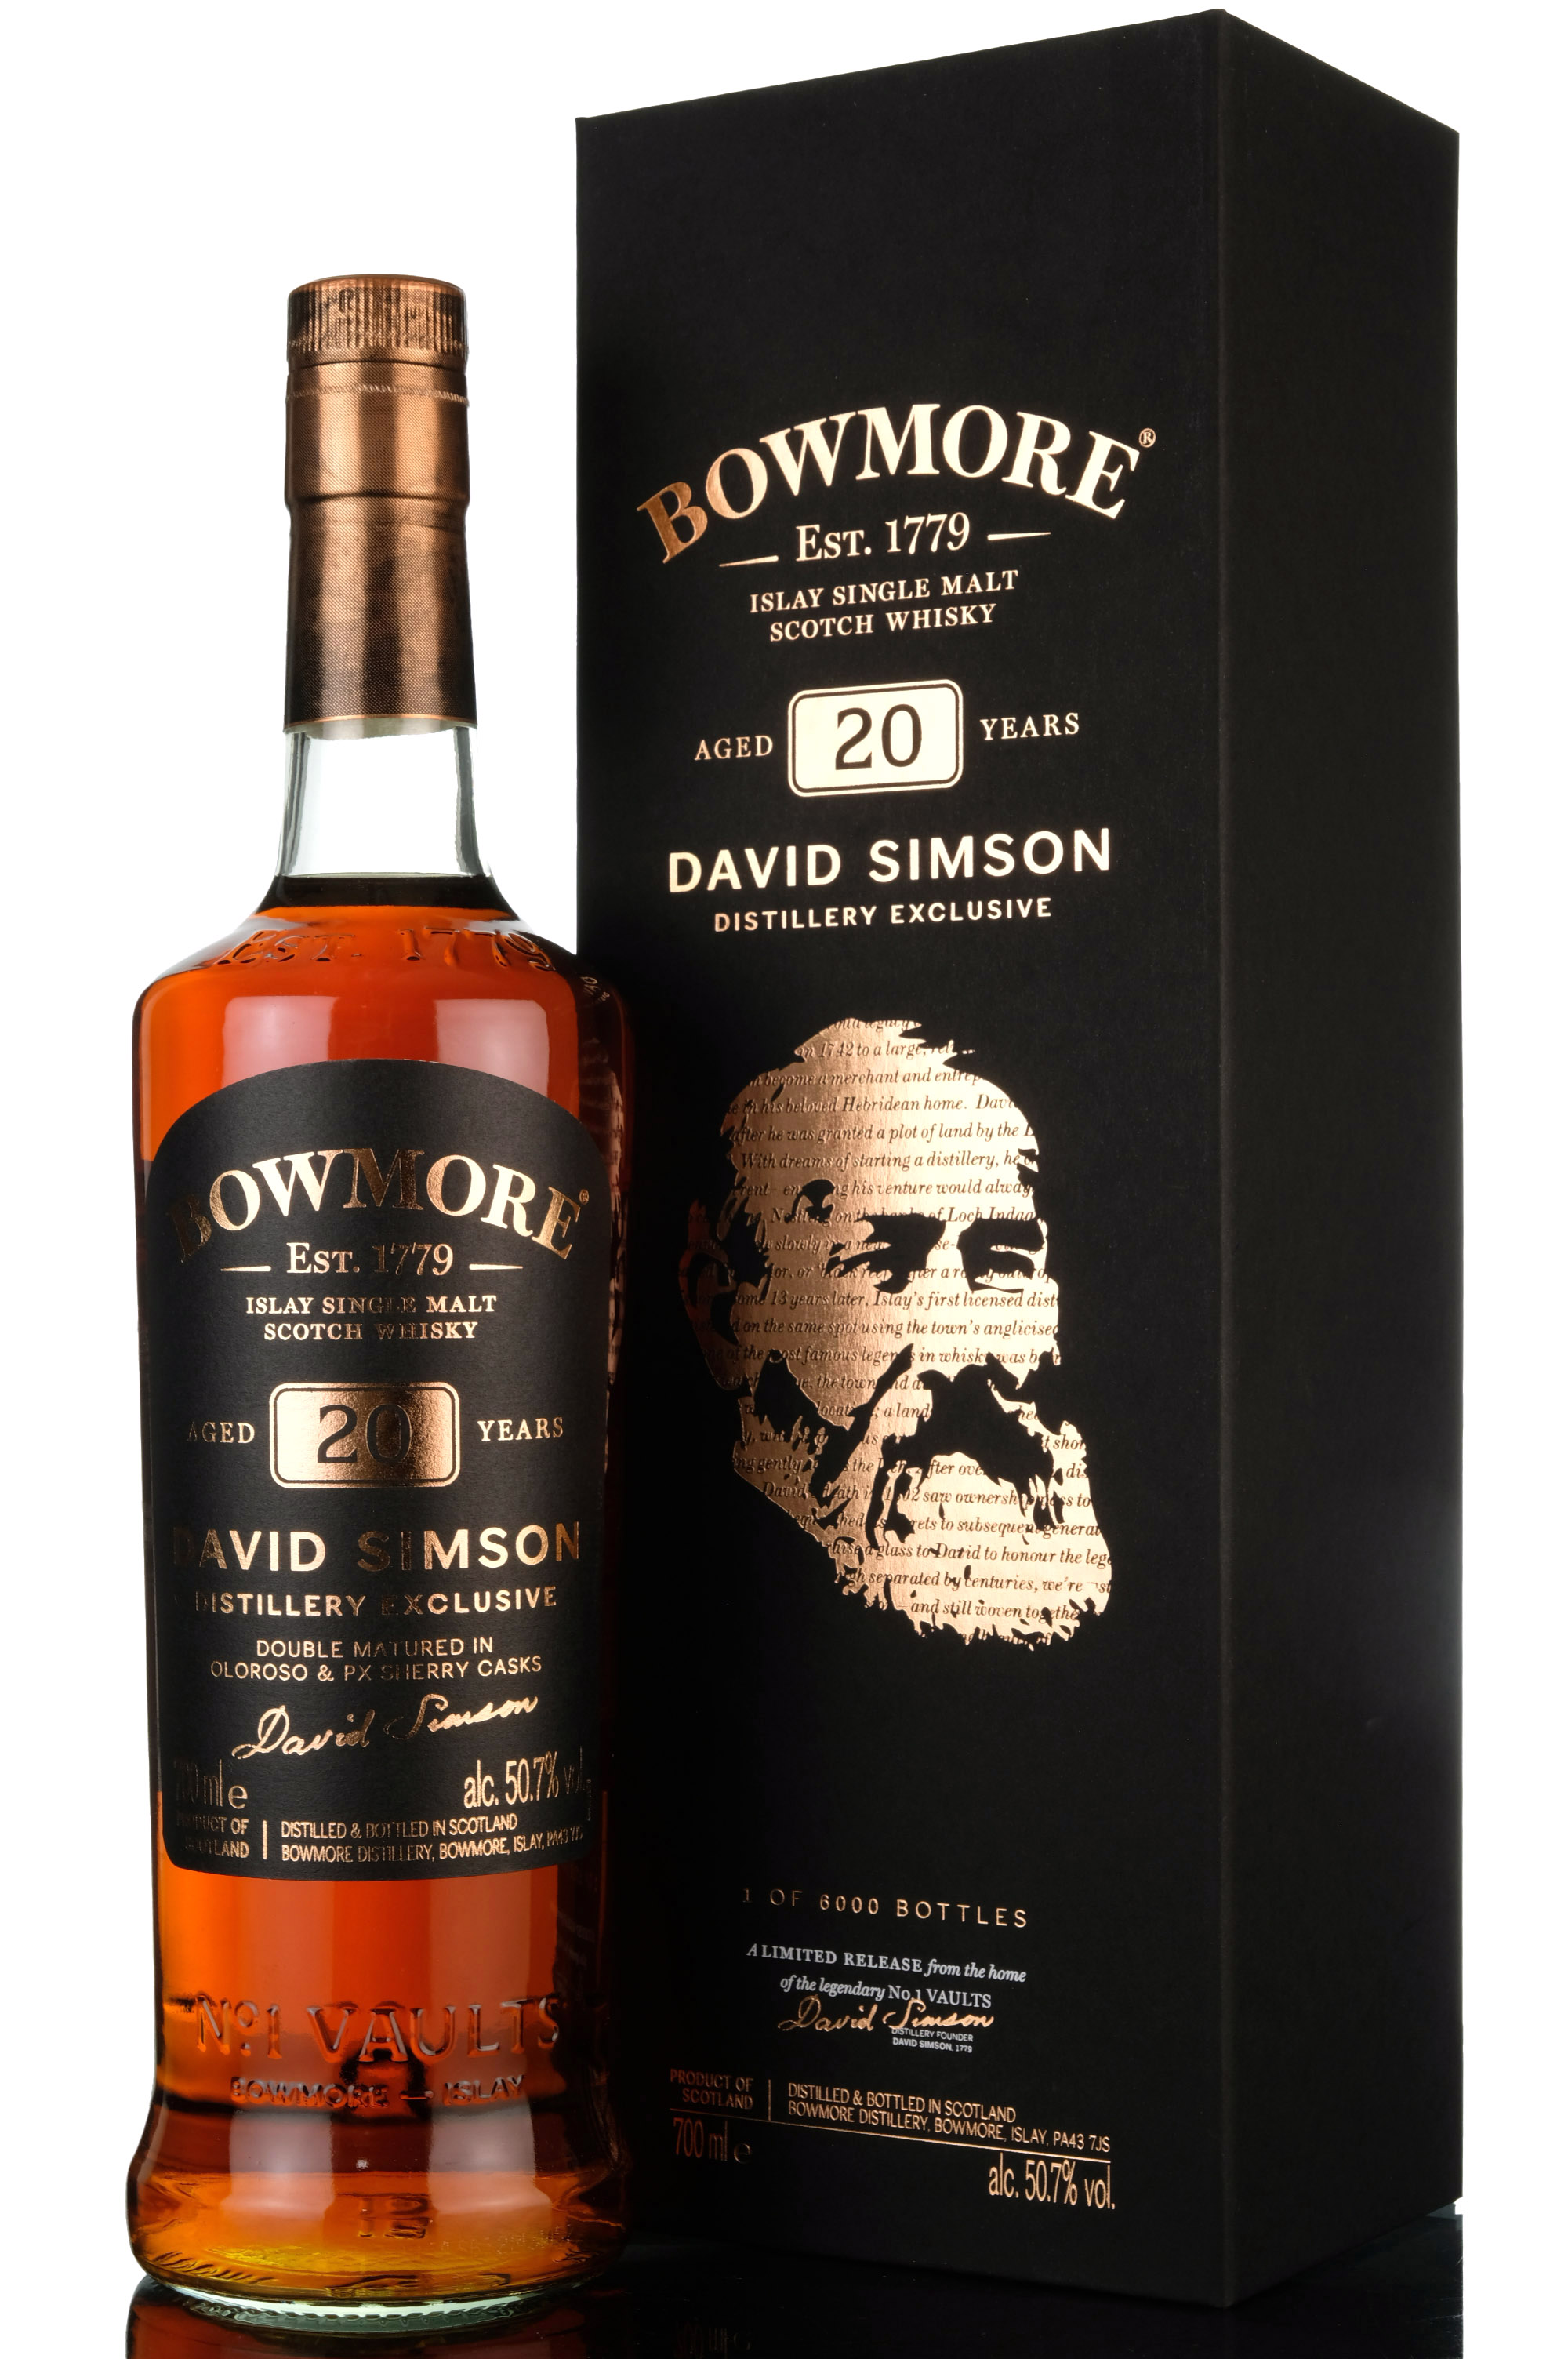 Bowmore 20 Year Old - David Simson Distillery Exclusive - 2020 Release